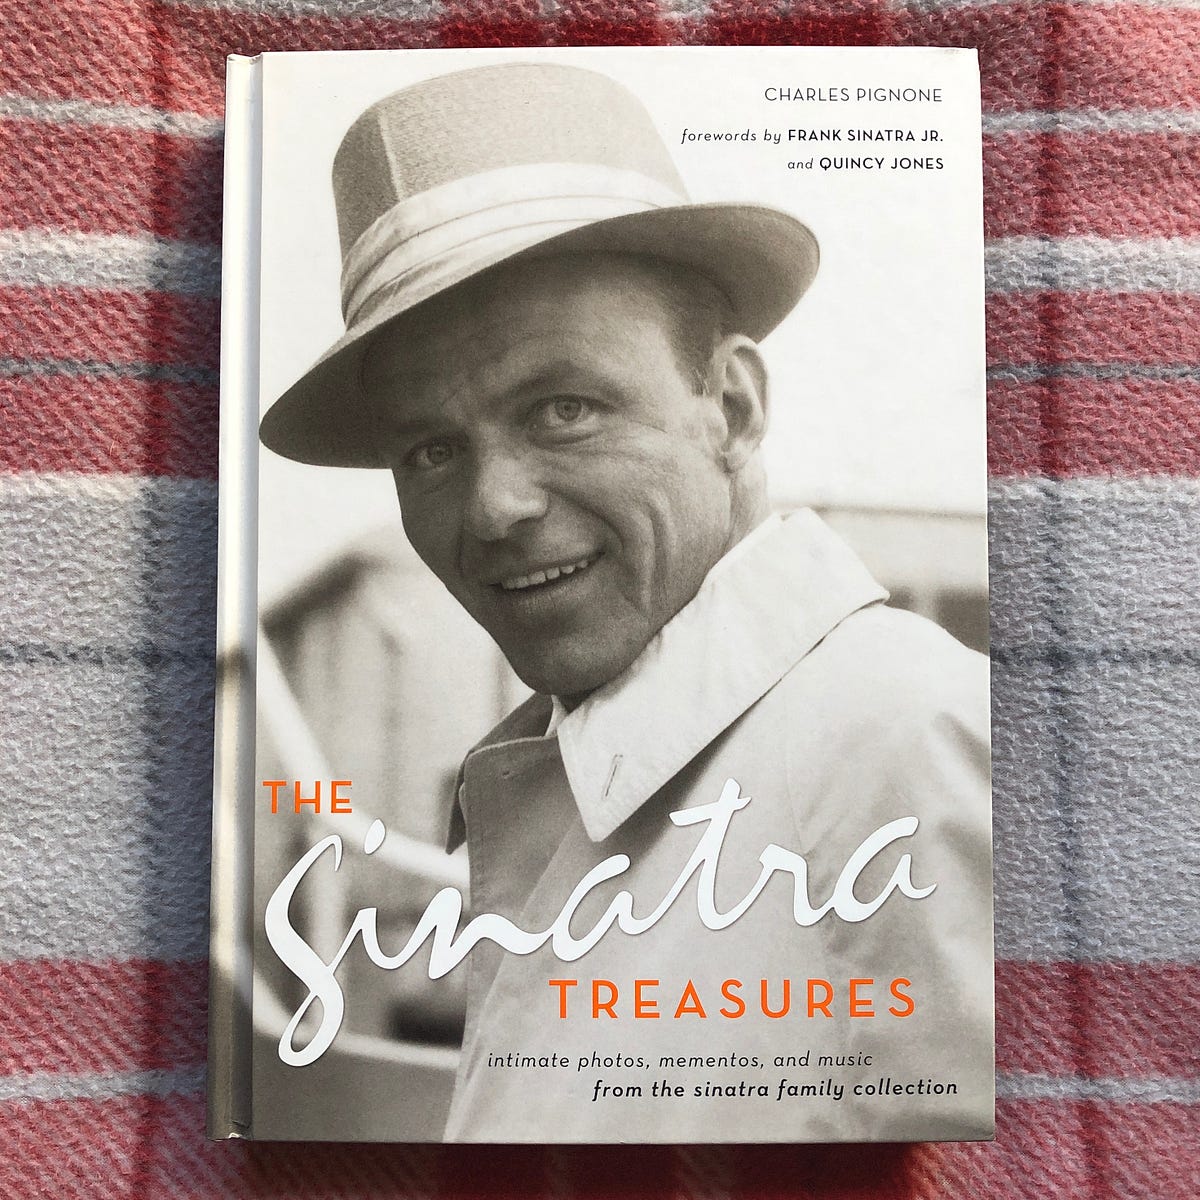 Ebook The Sinatra Treasures Intimate Photos Mementos And Music From The Sinatra Family Collection By Charles Pignone